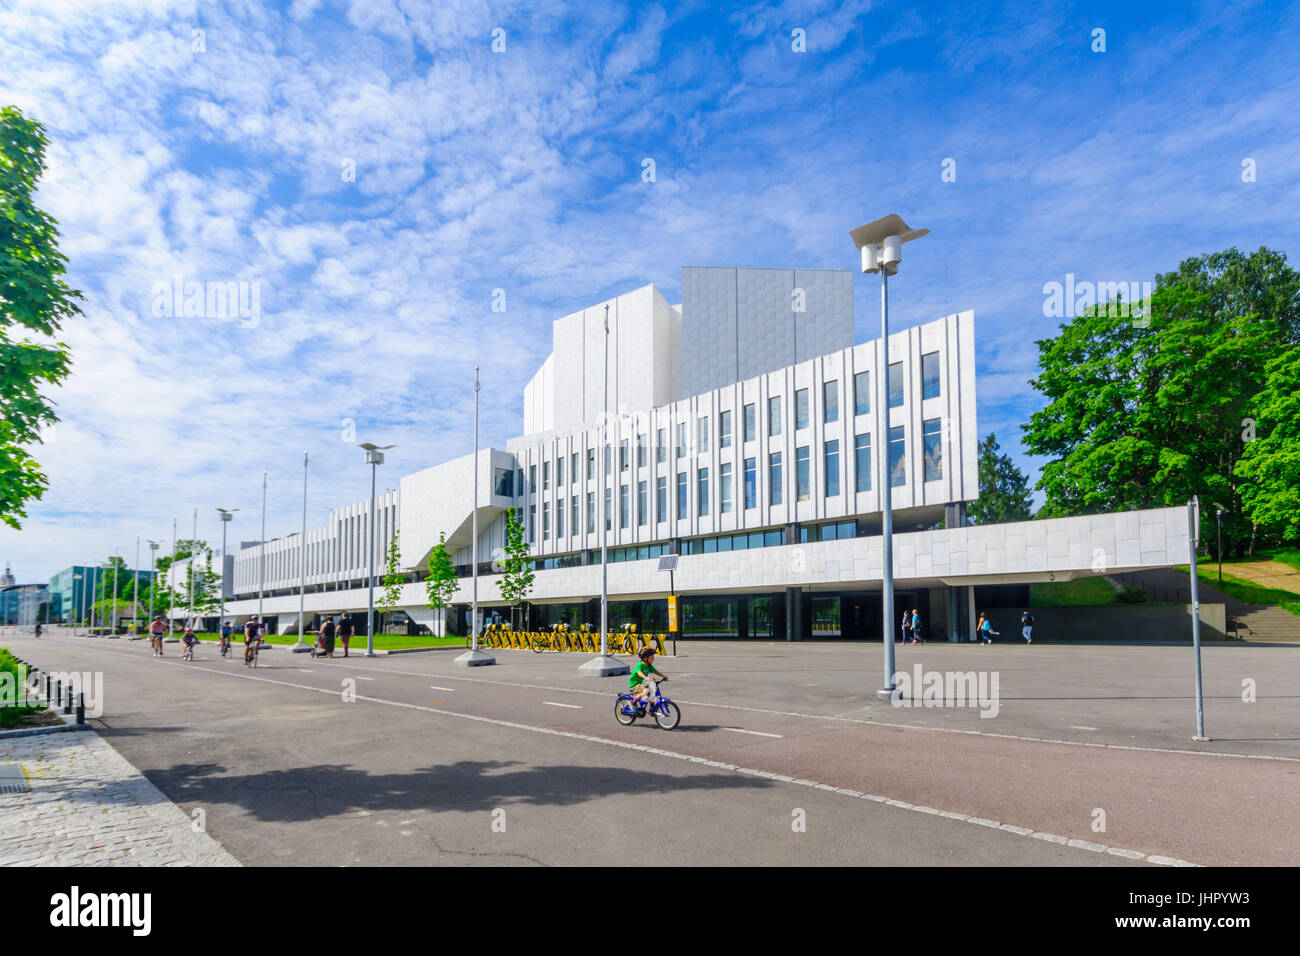 HELSINKI, FINLAND - JUNE 17, 2017: View of the Finlandia Hall, with locals and visitors, in Helsinki, Finland Stock Photo